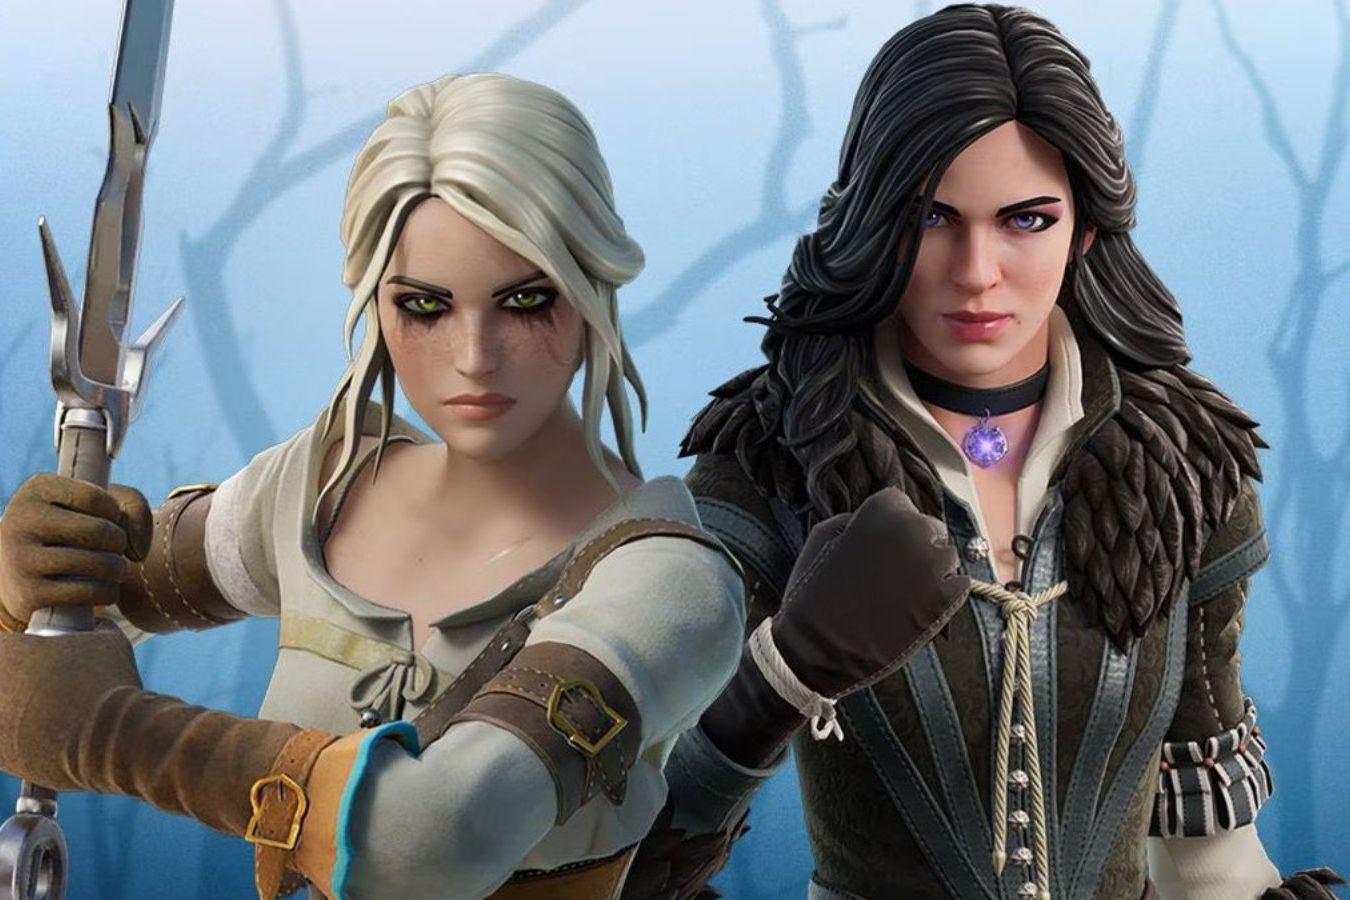 Yennefer of vengerberg the witcher 3 voiced standalone follower se фото 34